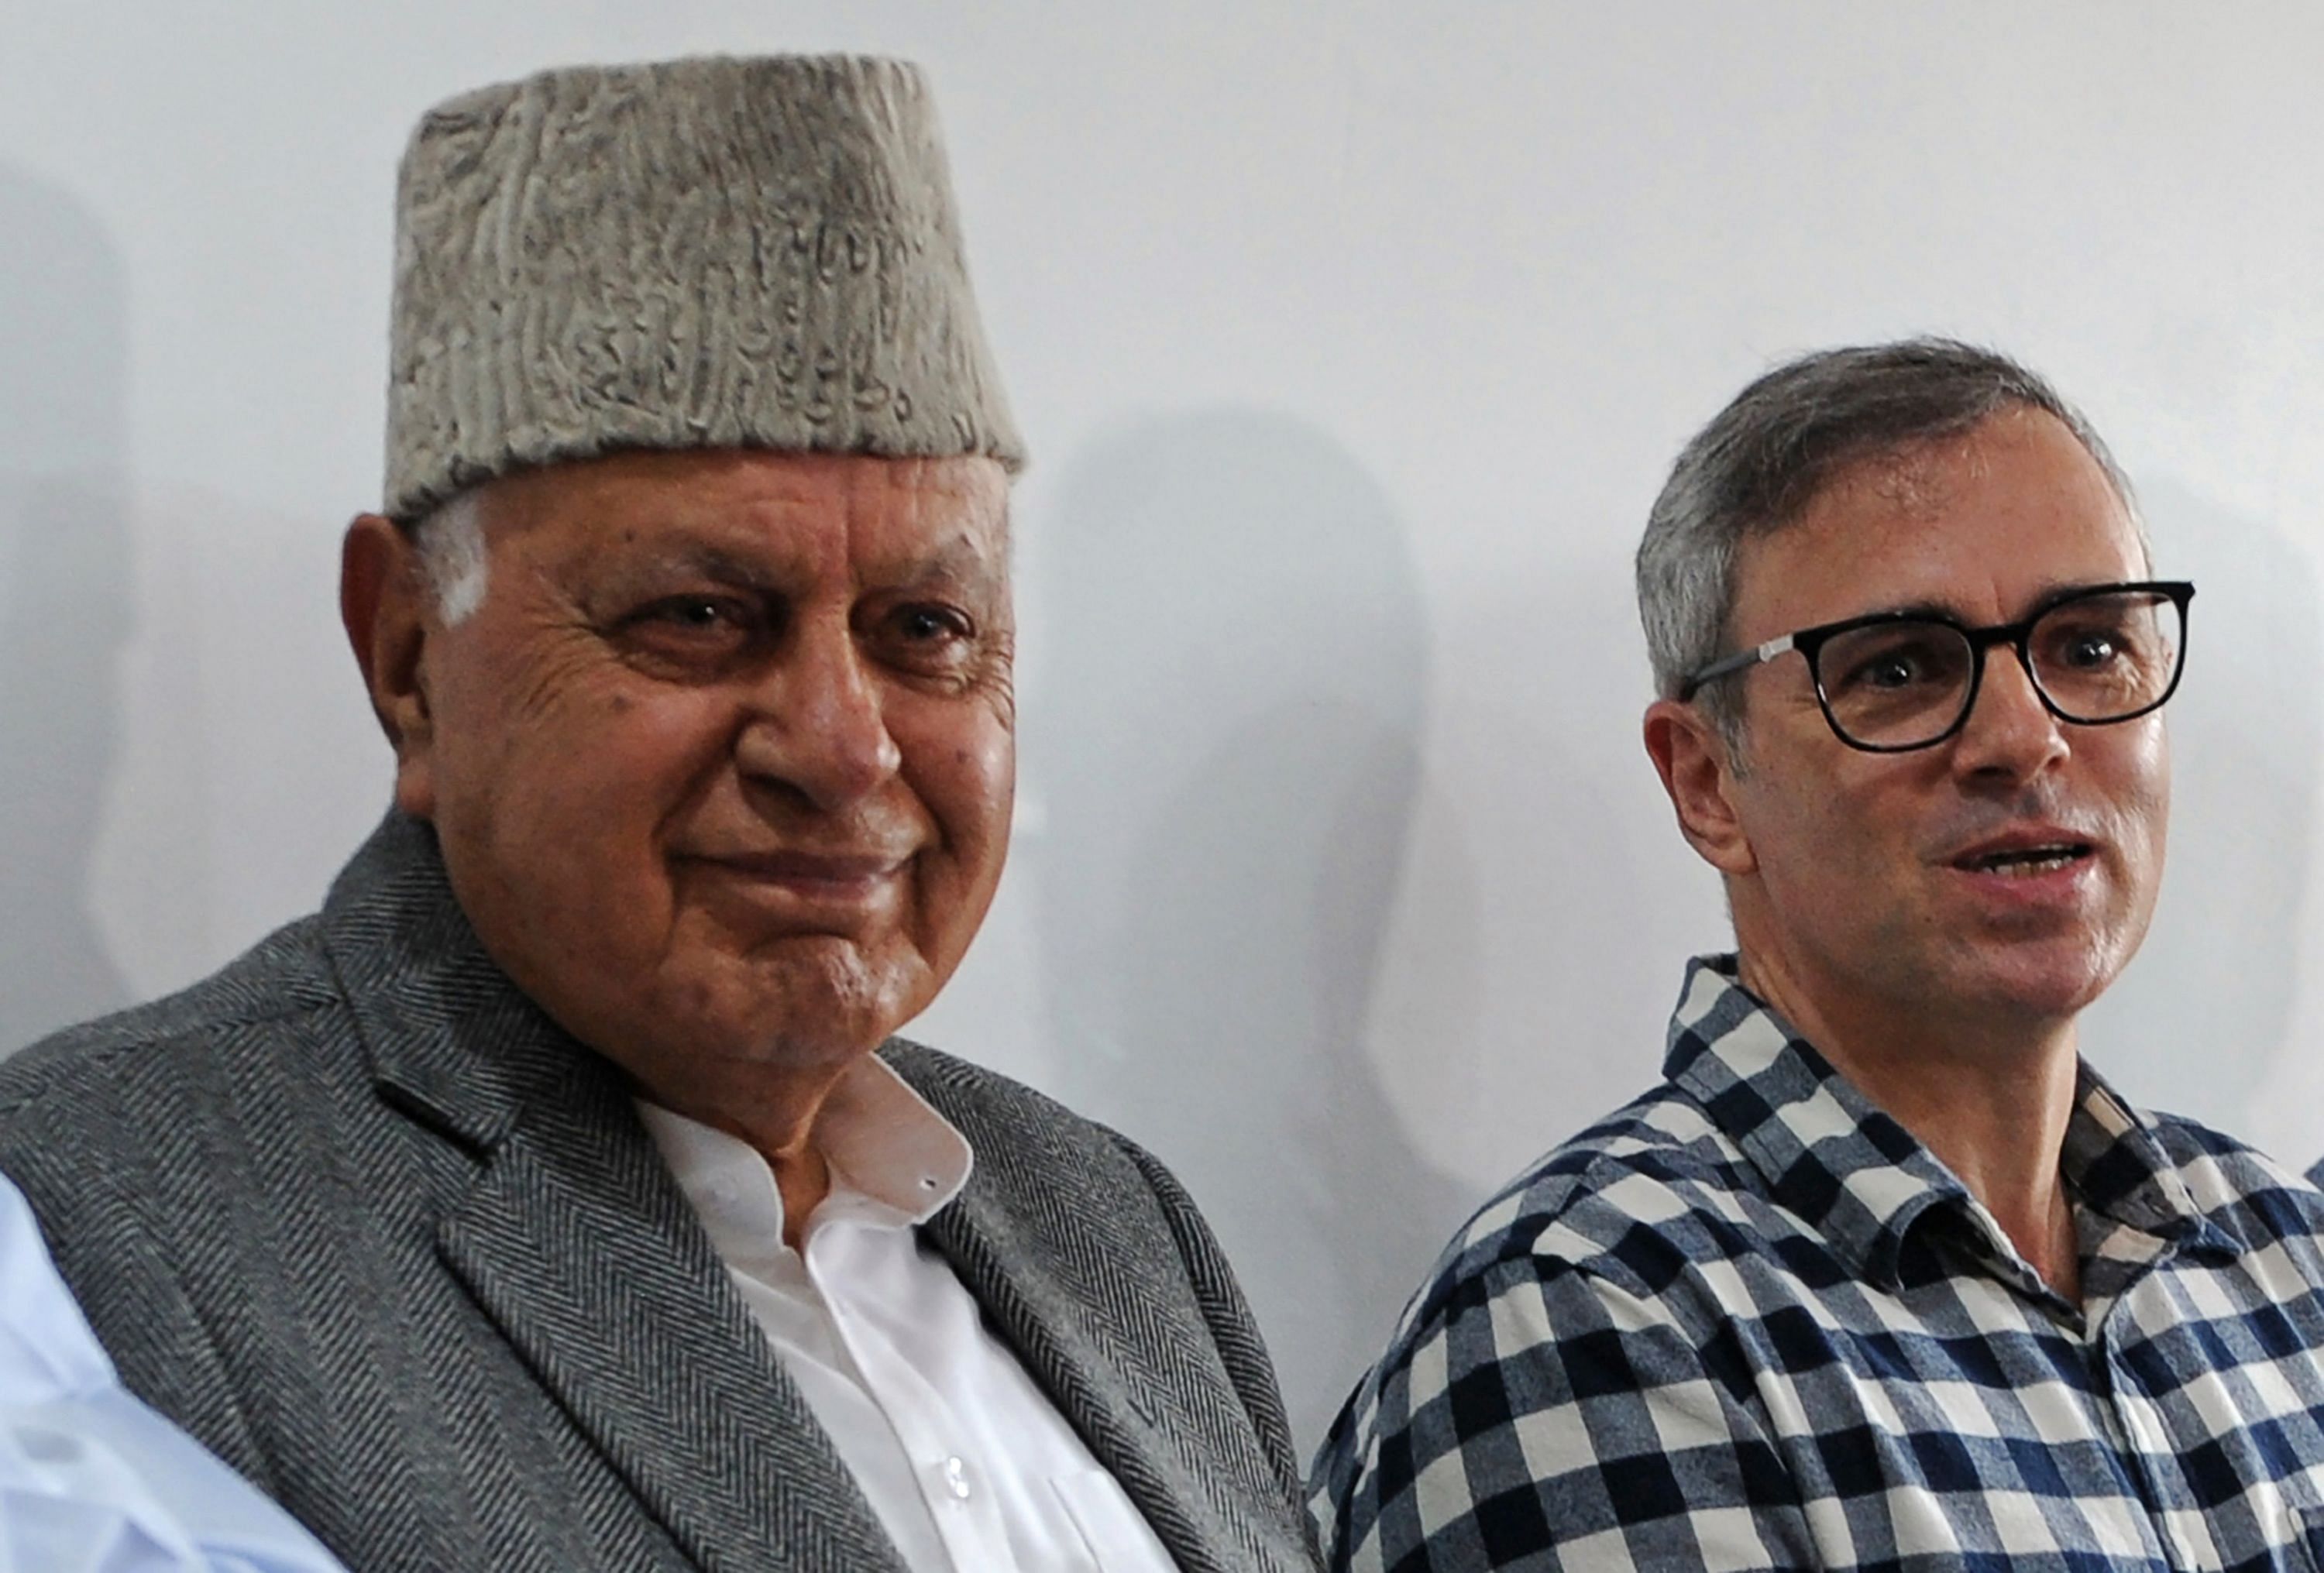 Farooq Abdullah, Omar Abdullah and other leaders, including another chief minister and Peoples Democratic Party (PDP) president Mehbooba Mufti.(Credit: AFP Photo)